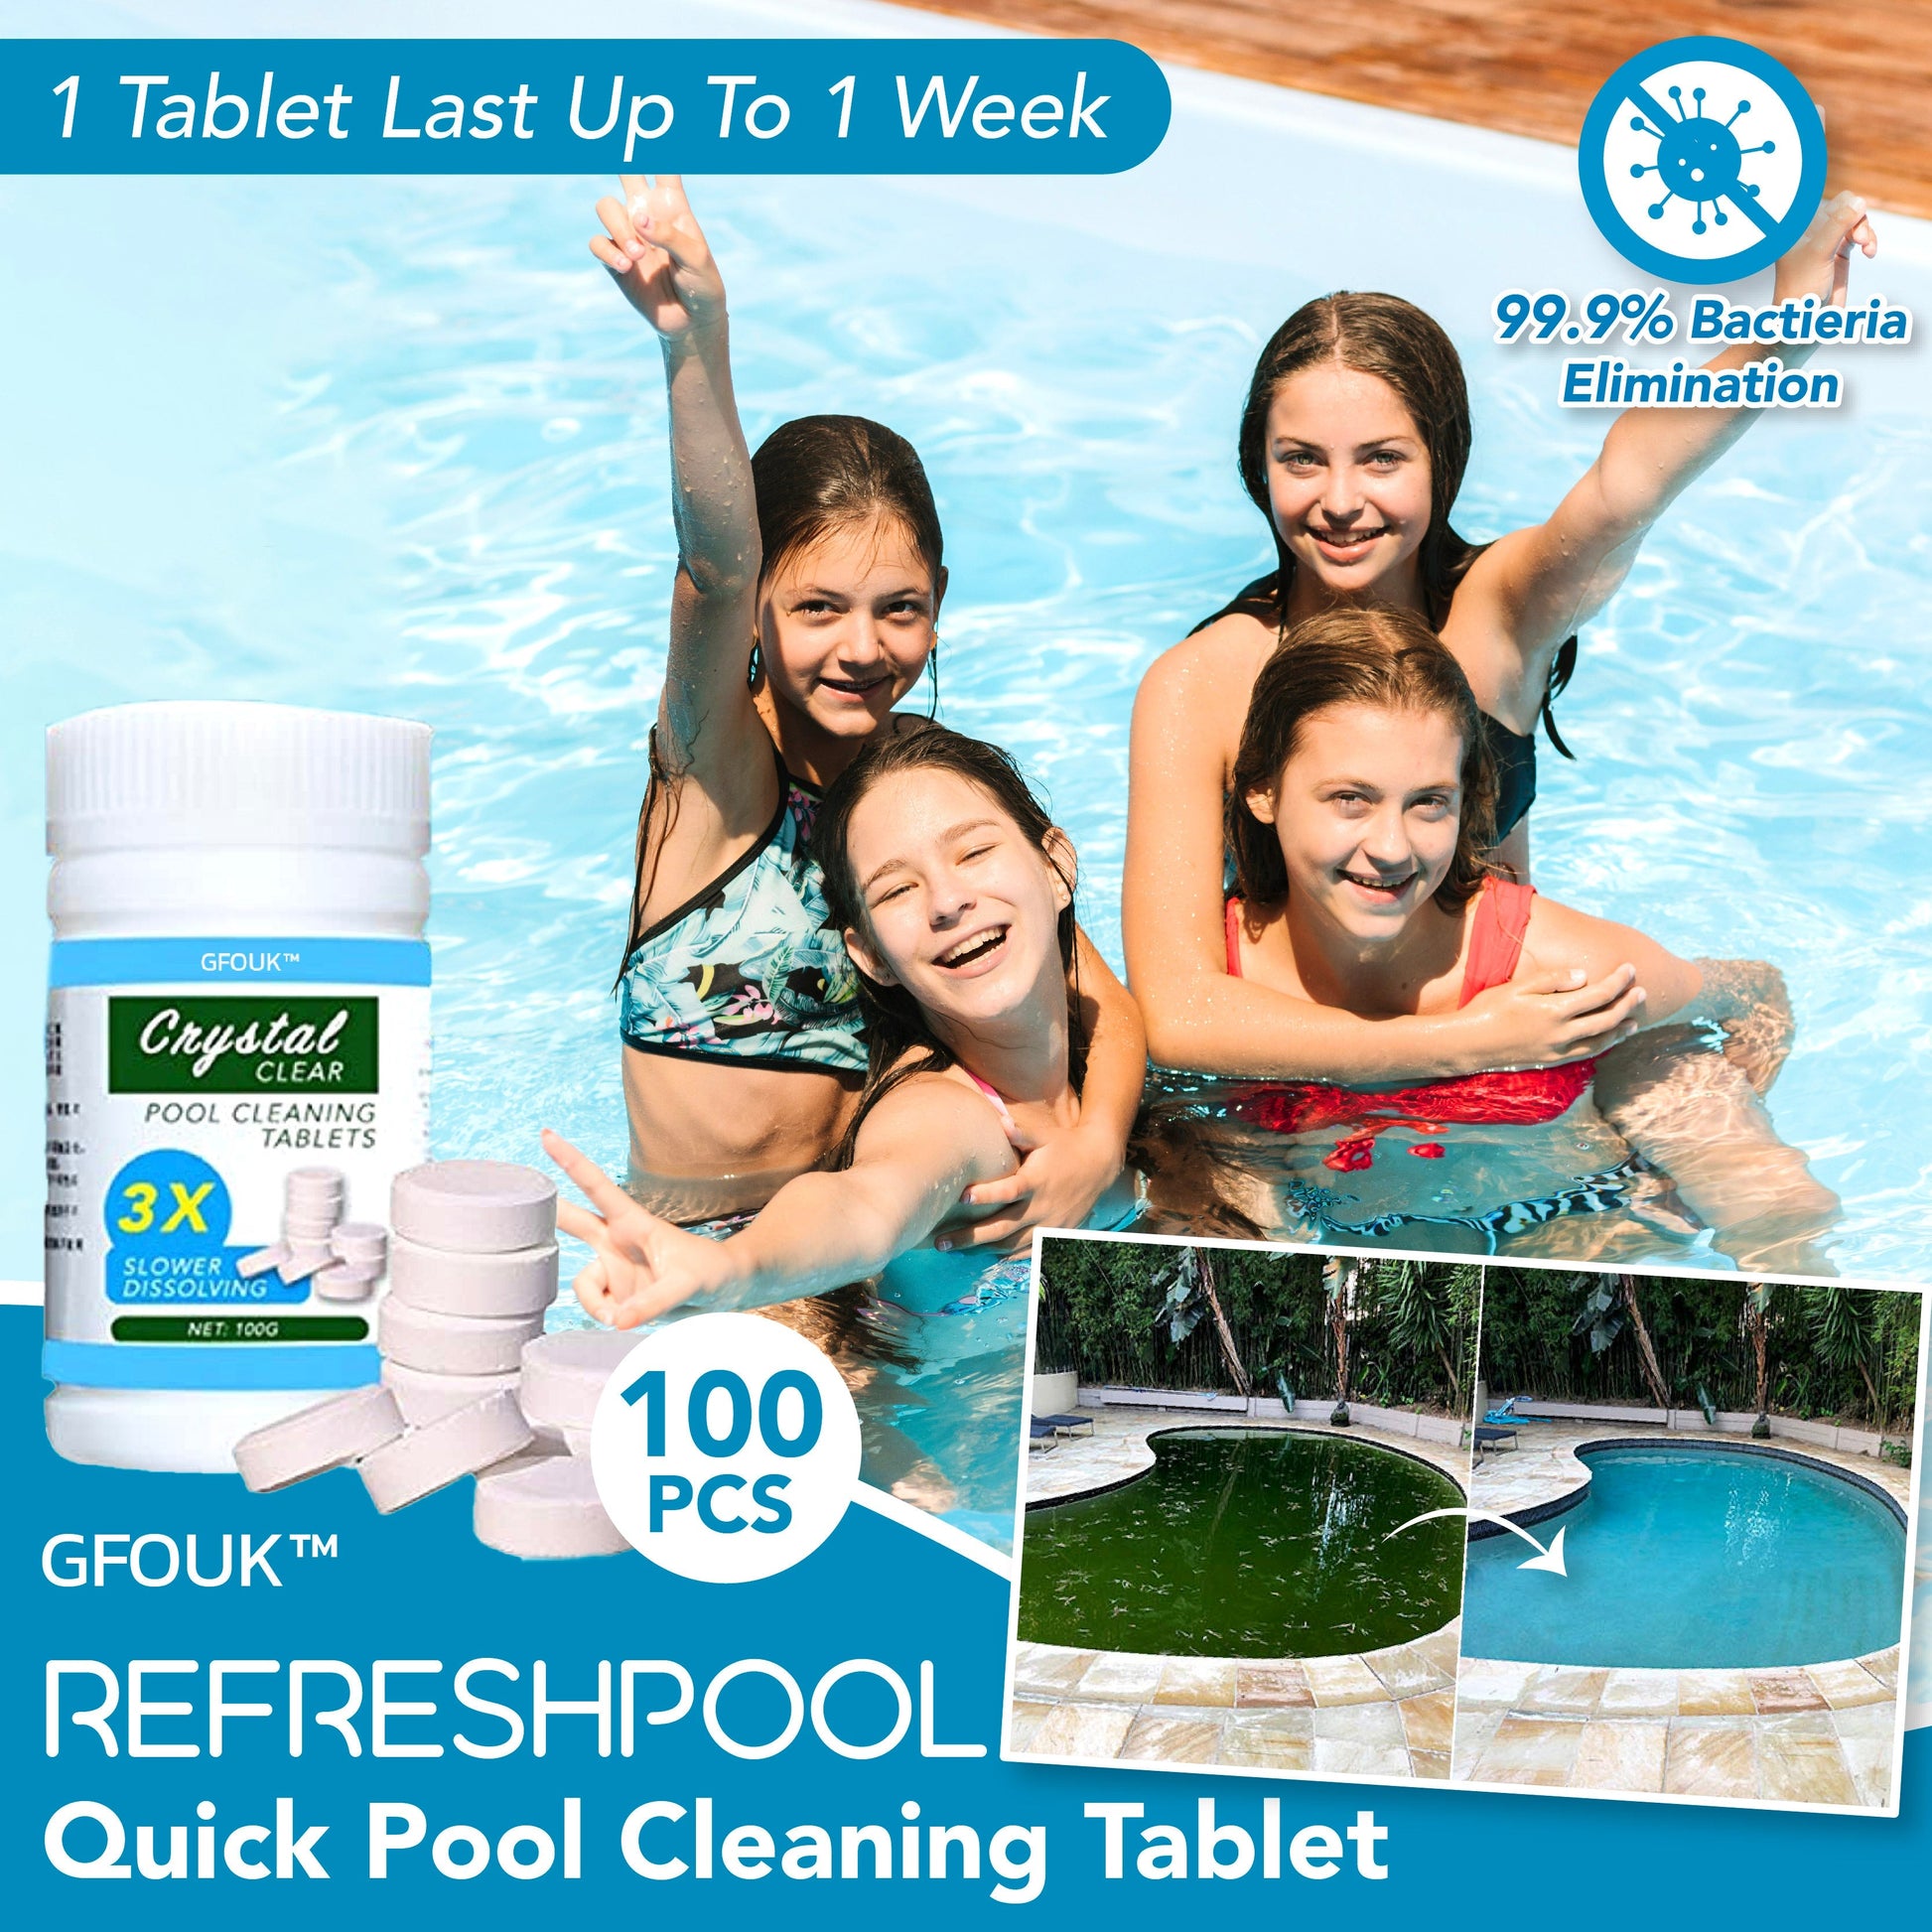 Keilini™ RefreshPool Quick Pool Cleaning Tablet (100 PCS)